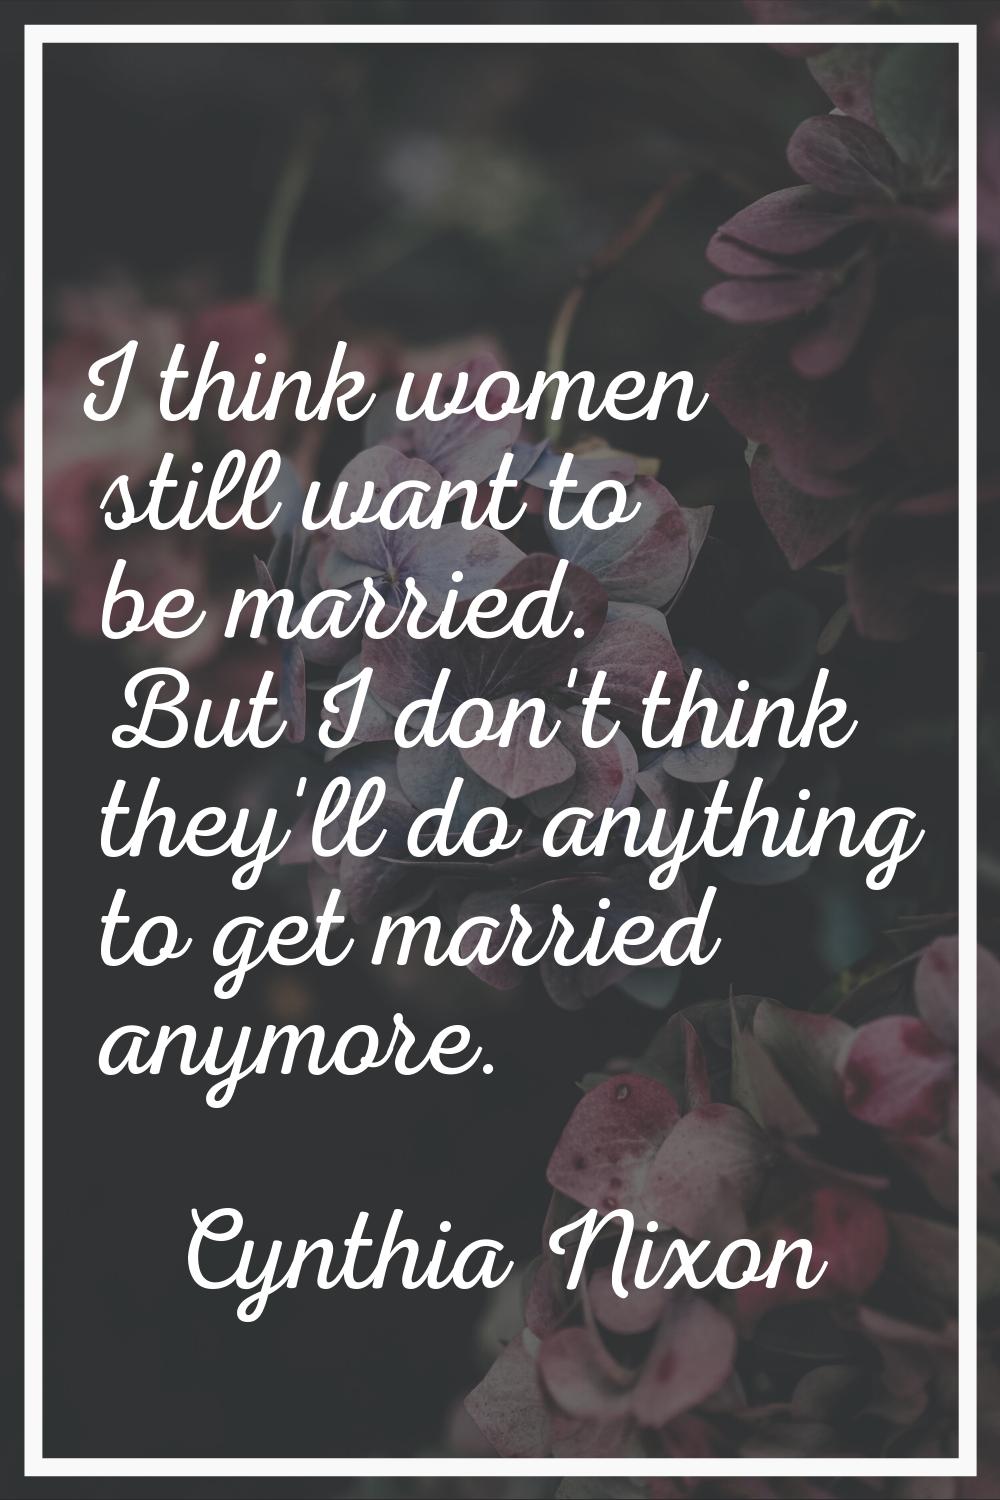 I think women still want to be married. But I don't think they'll do anything to get married anymor